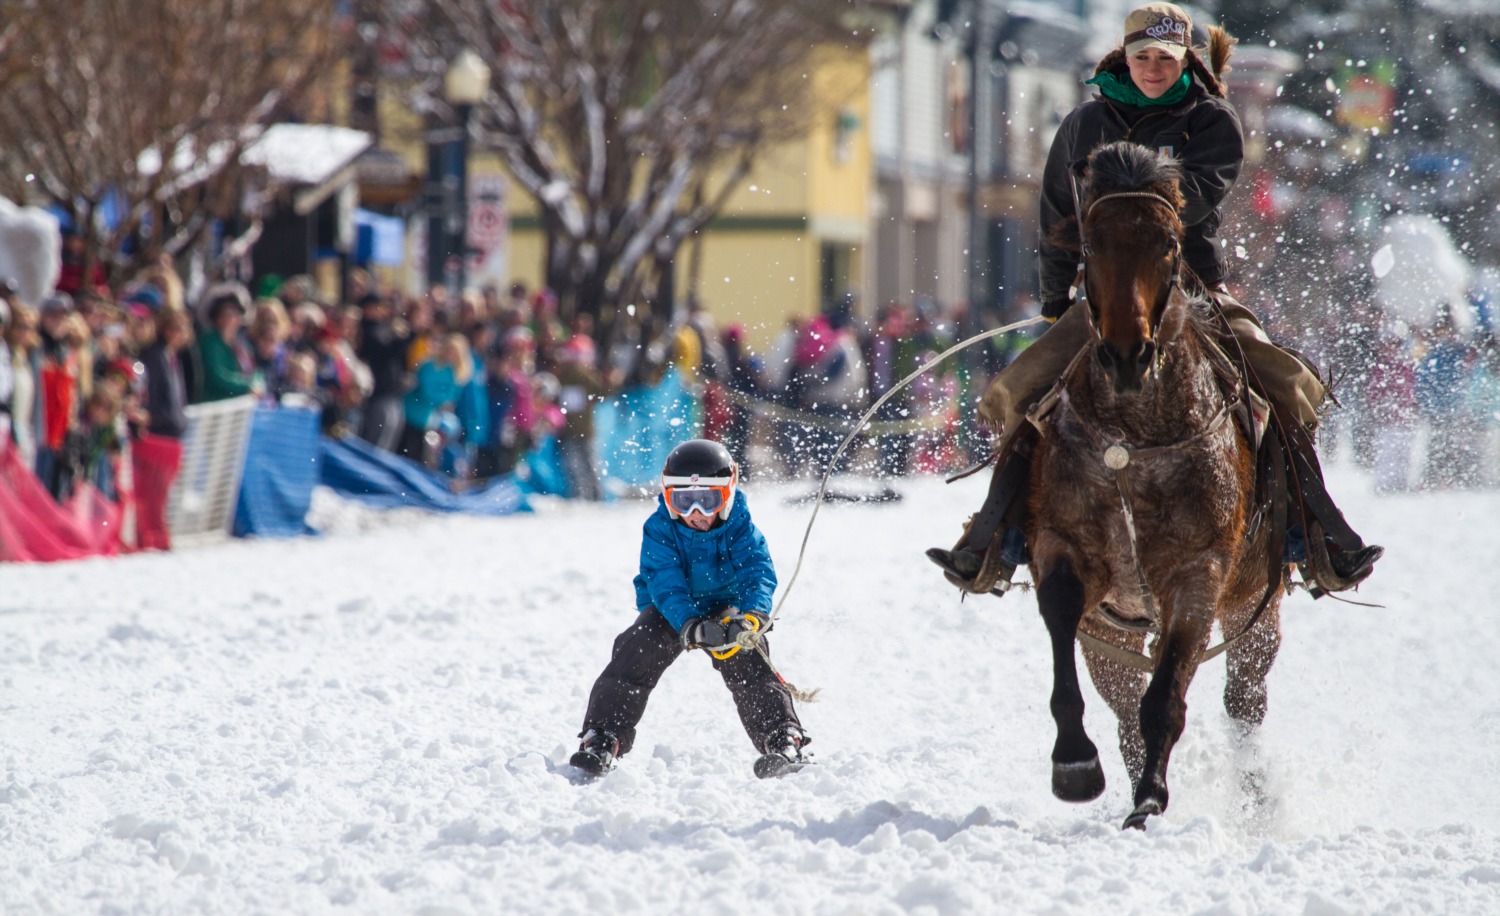 Steamboat Springs Winter Activities Top Events & Things to Do in Winter